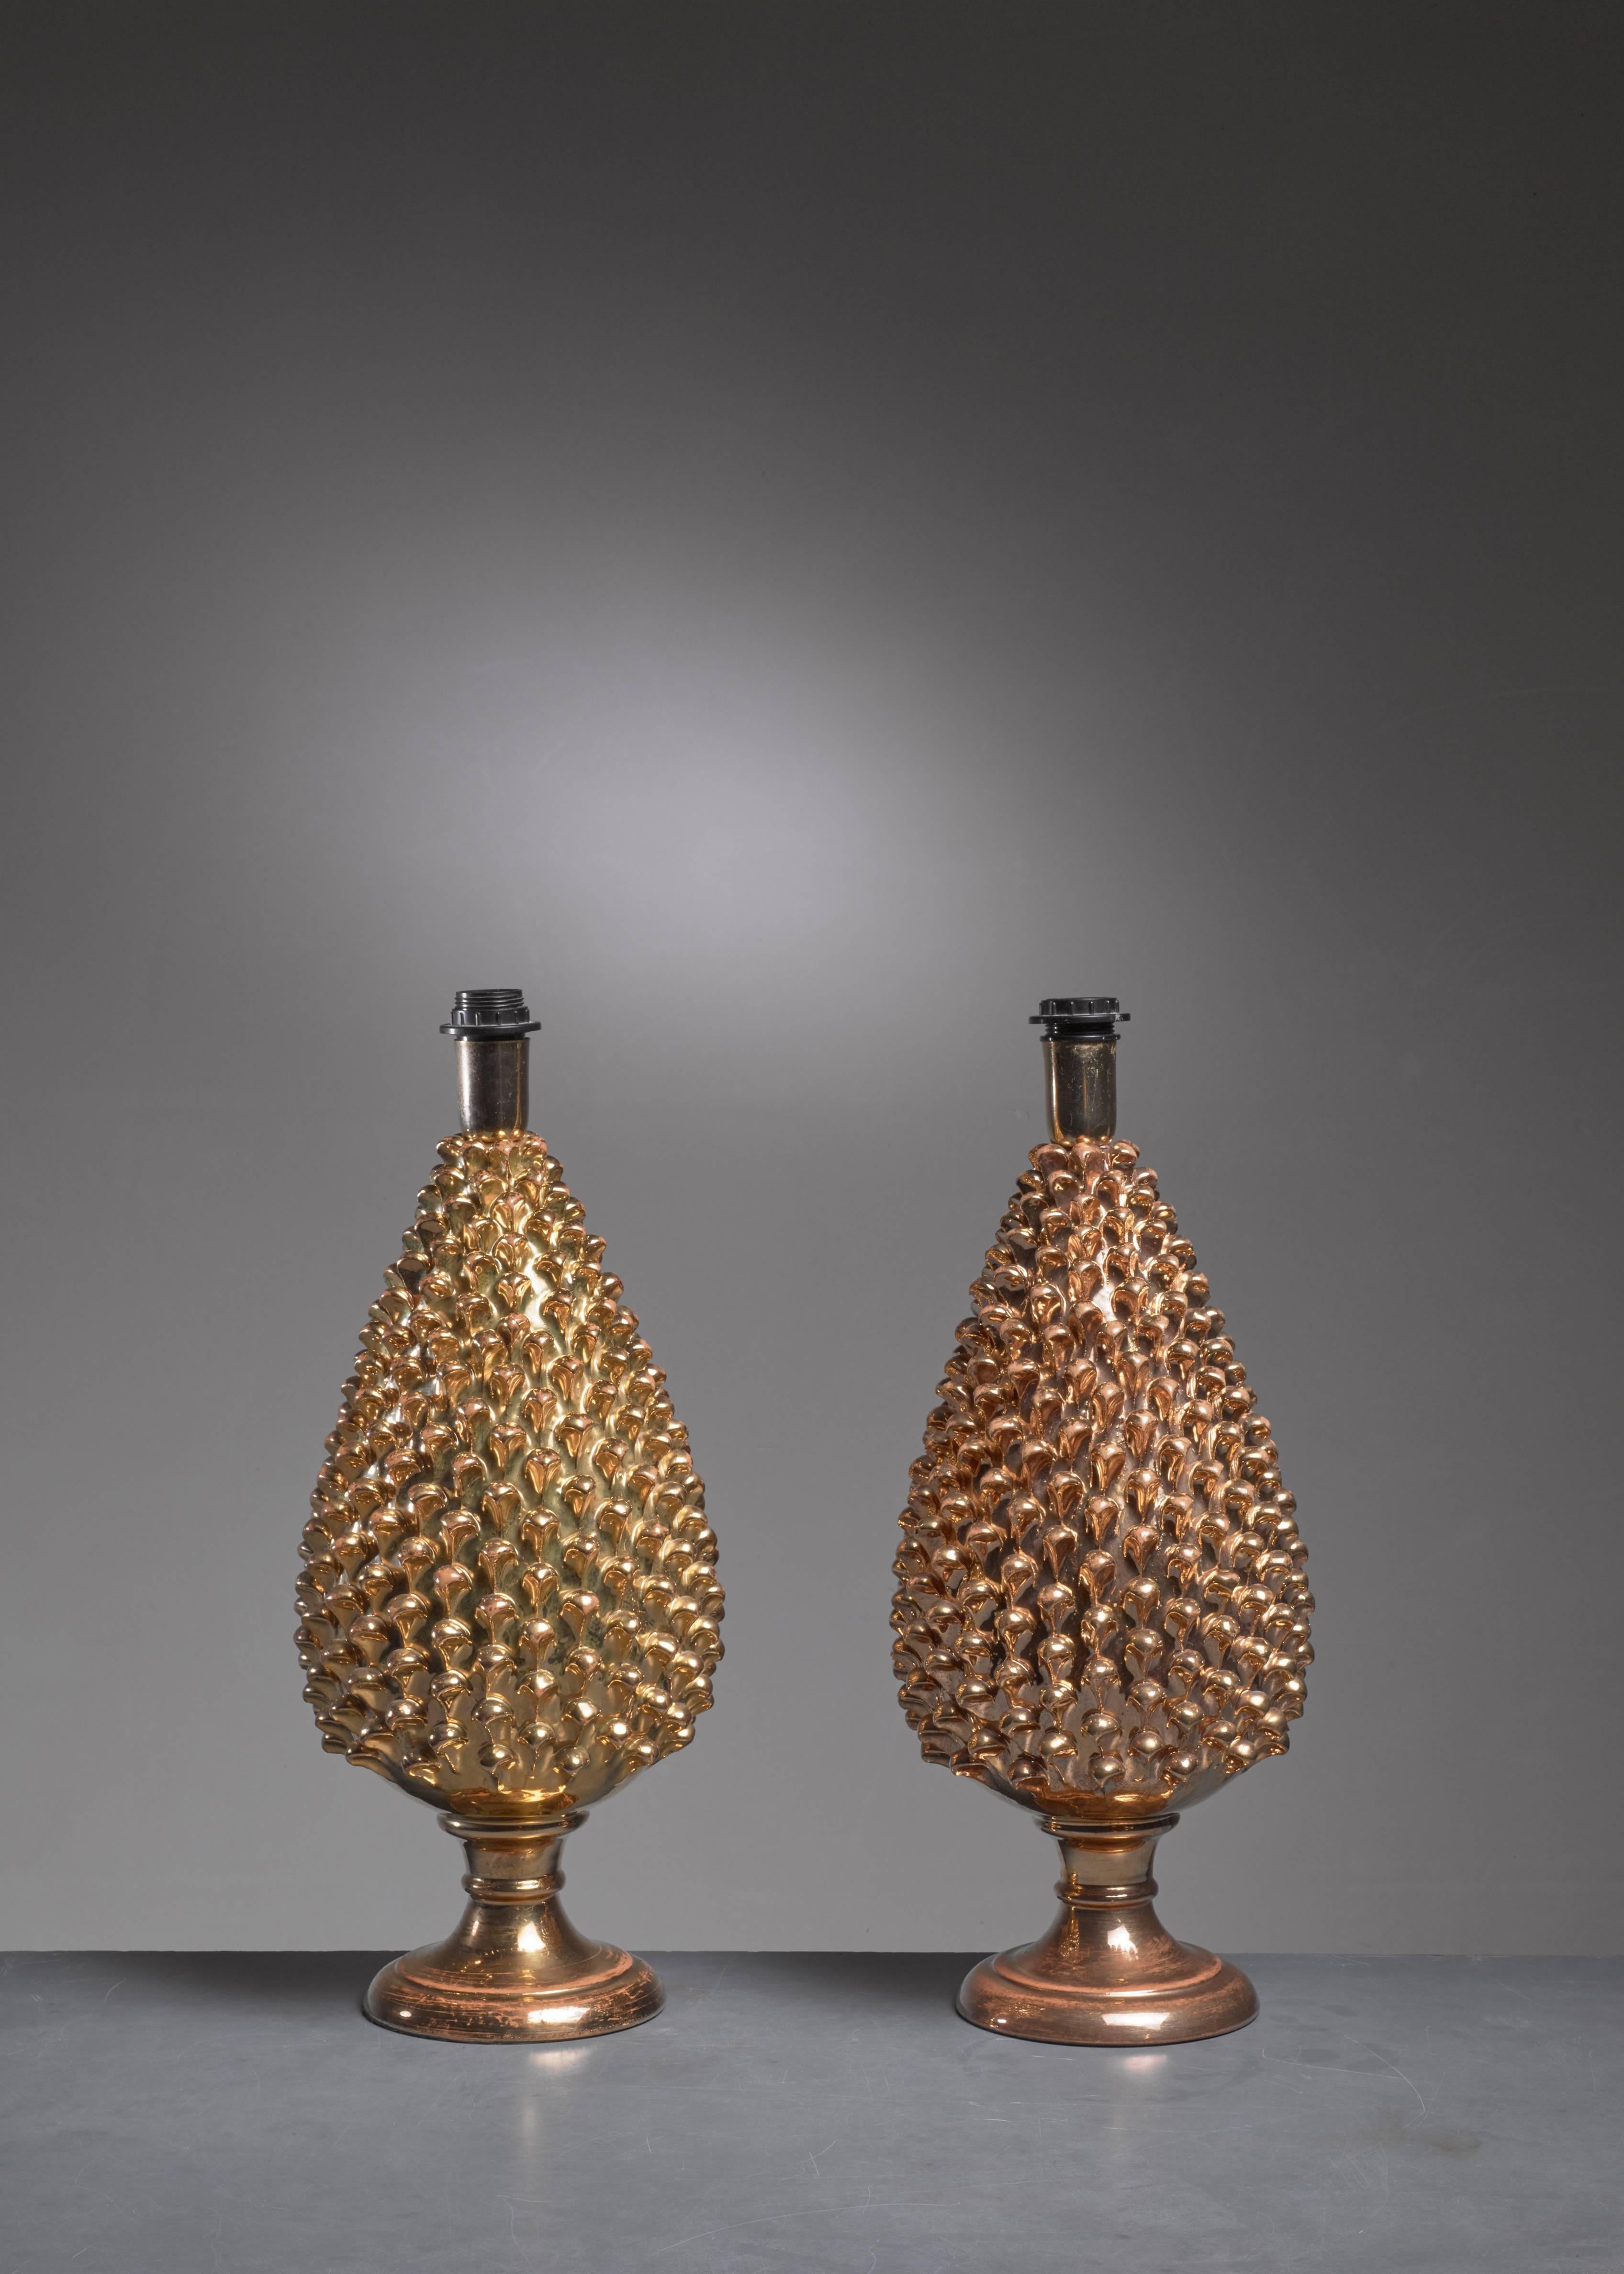 A pair of organically shaped Mangani table lamps made of gold painted glass.